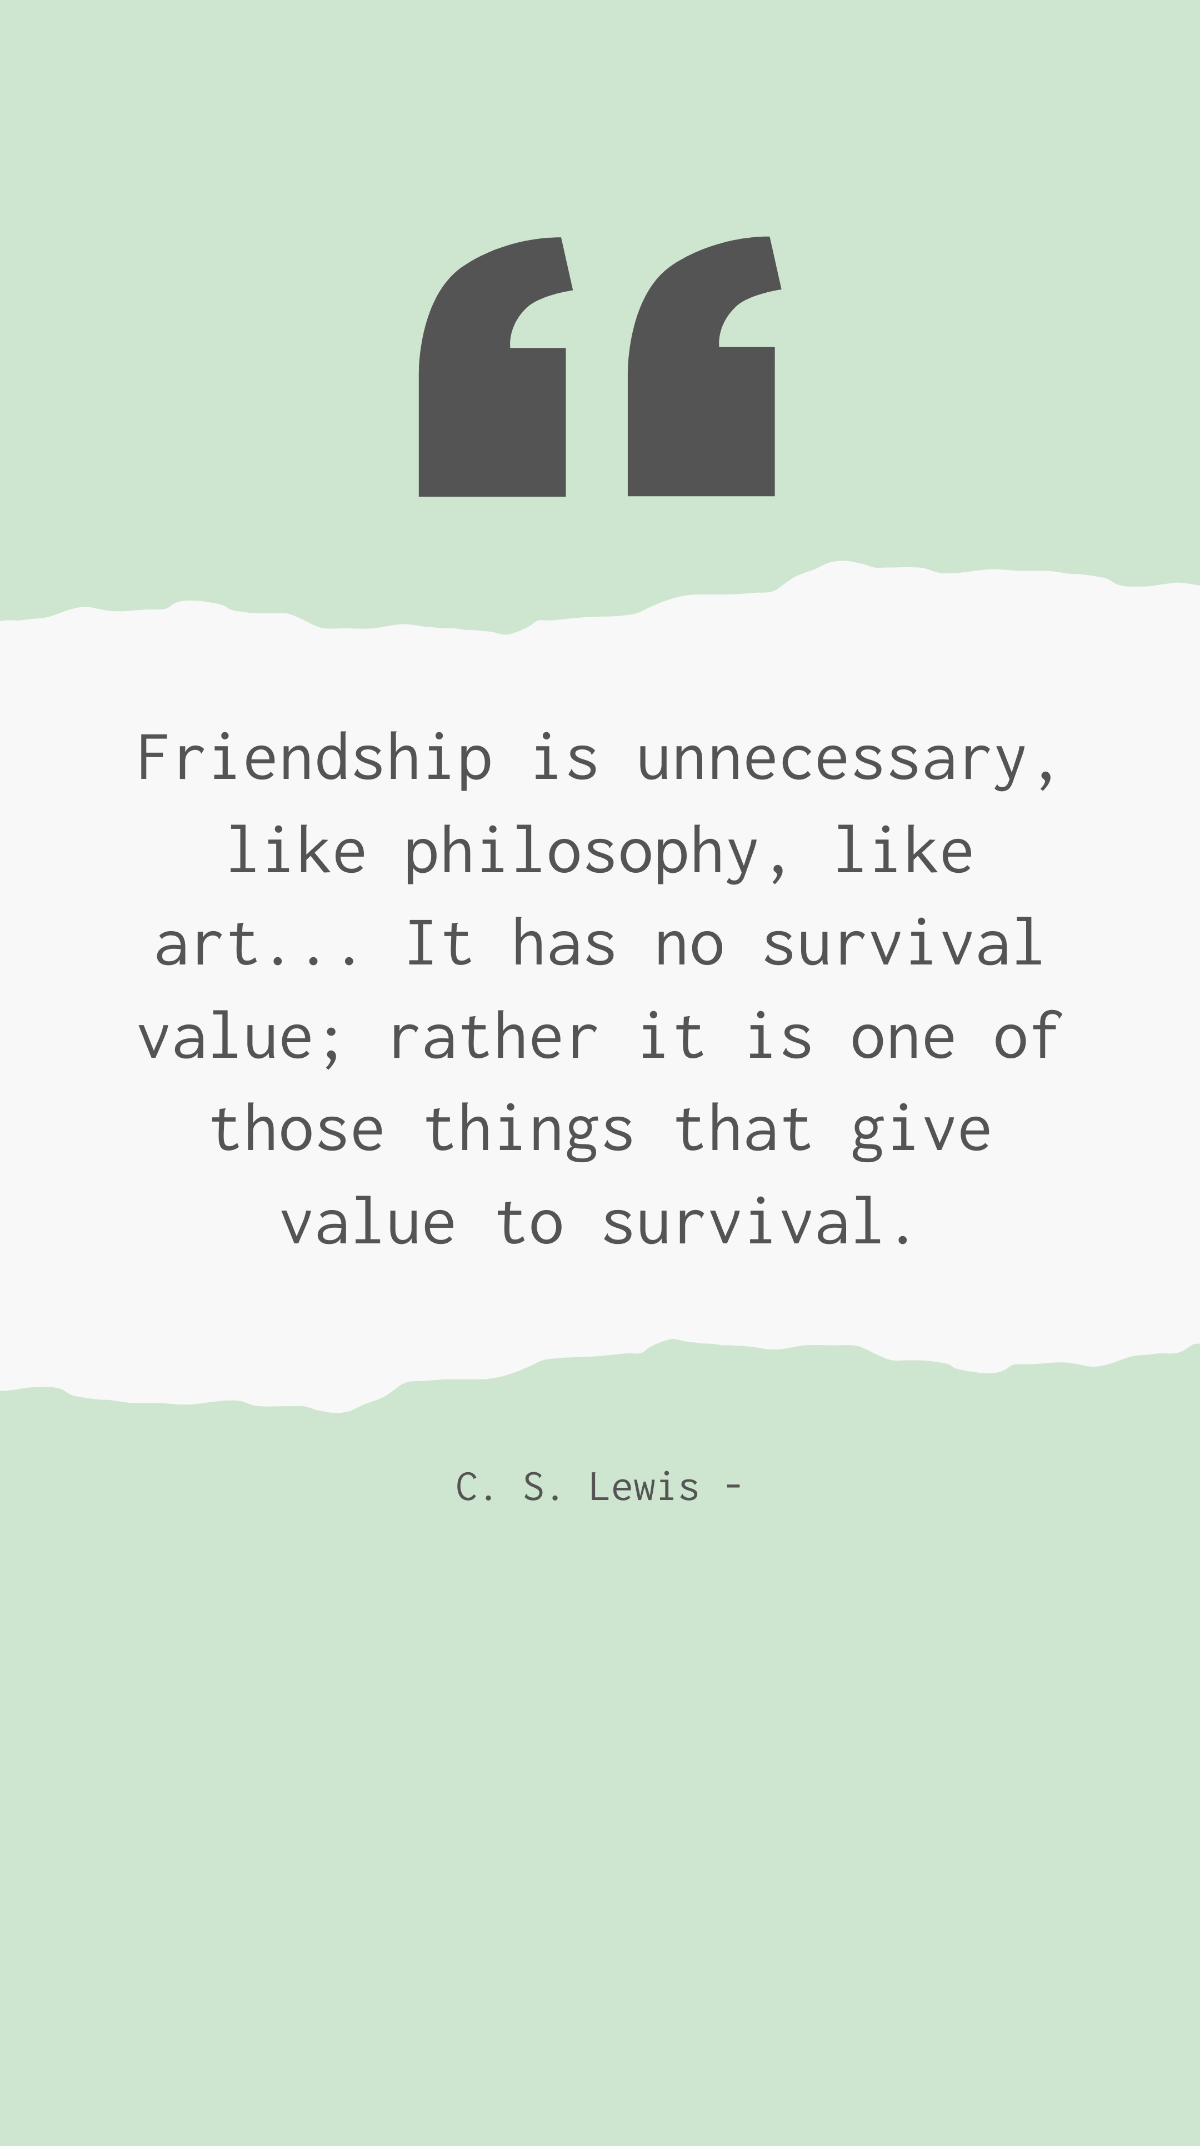 C. S. Lewis - Friendship is unnecessary, like philosophy, like art... It has no survival value; rather it is one of those things that give value to survival. Template